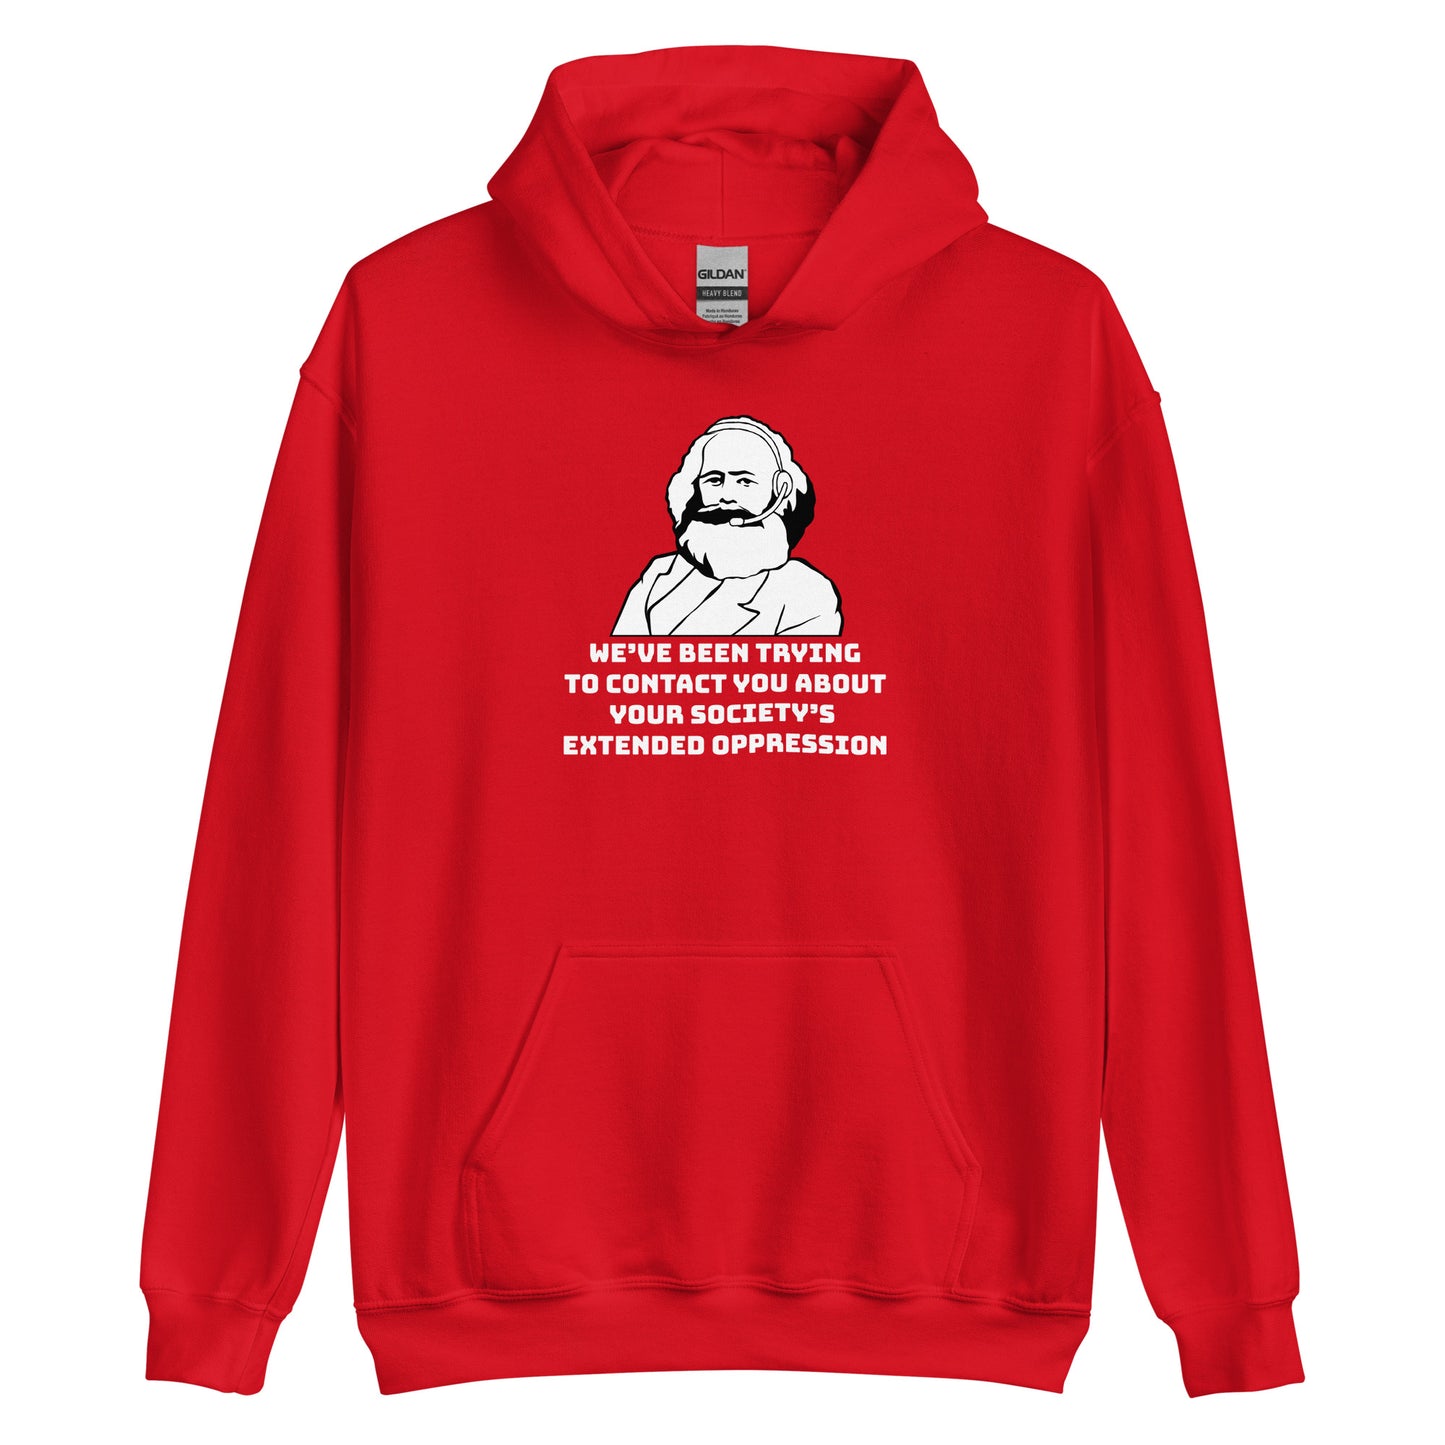 A red hooded sweatshirt featuring a black and white illustration of Karl Marx wearing a telemarketer headset. Text beneath Marx reads "We've been trying to contact you about your society's extended oppression." in a blocky font.